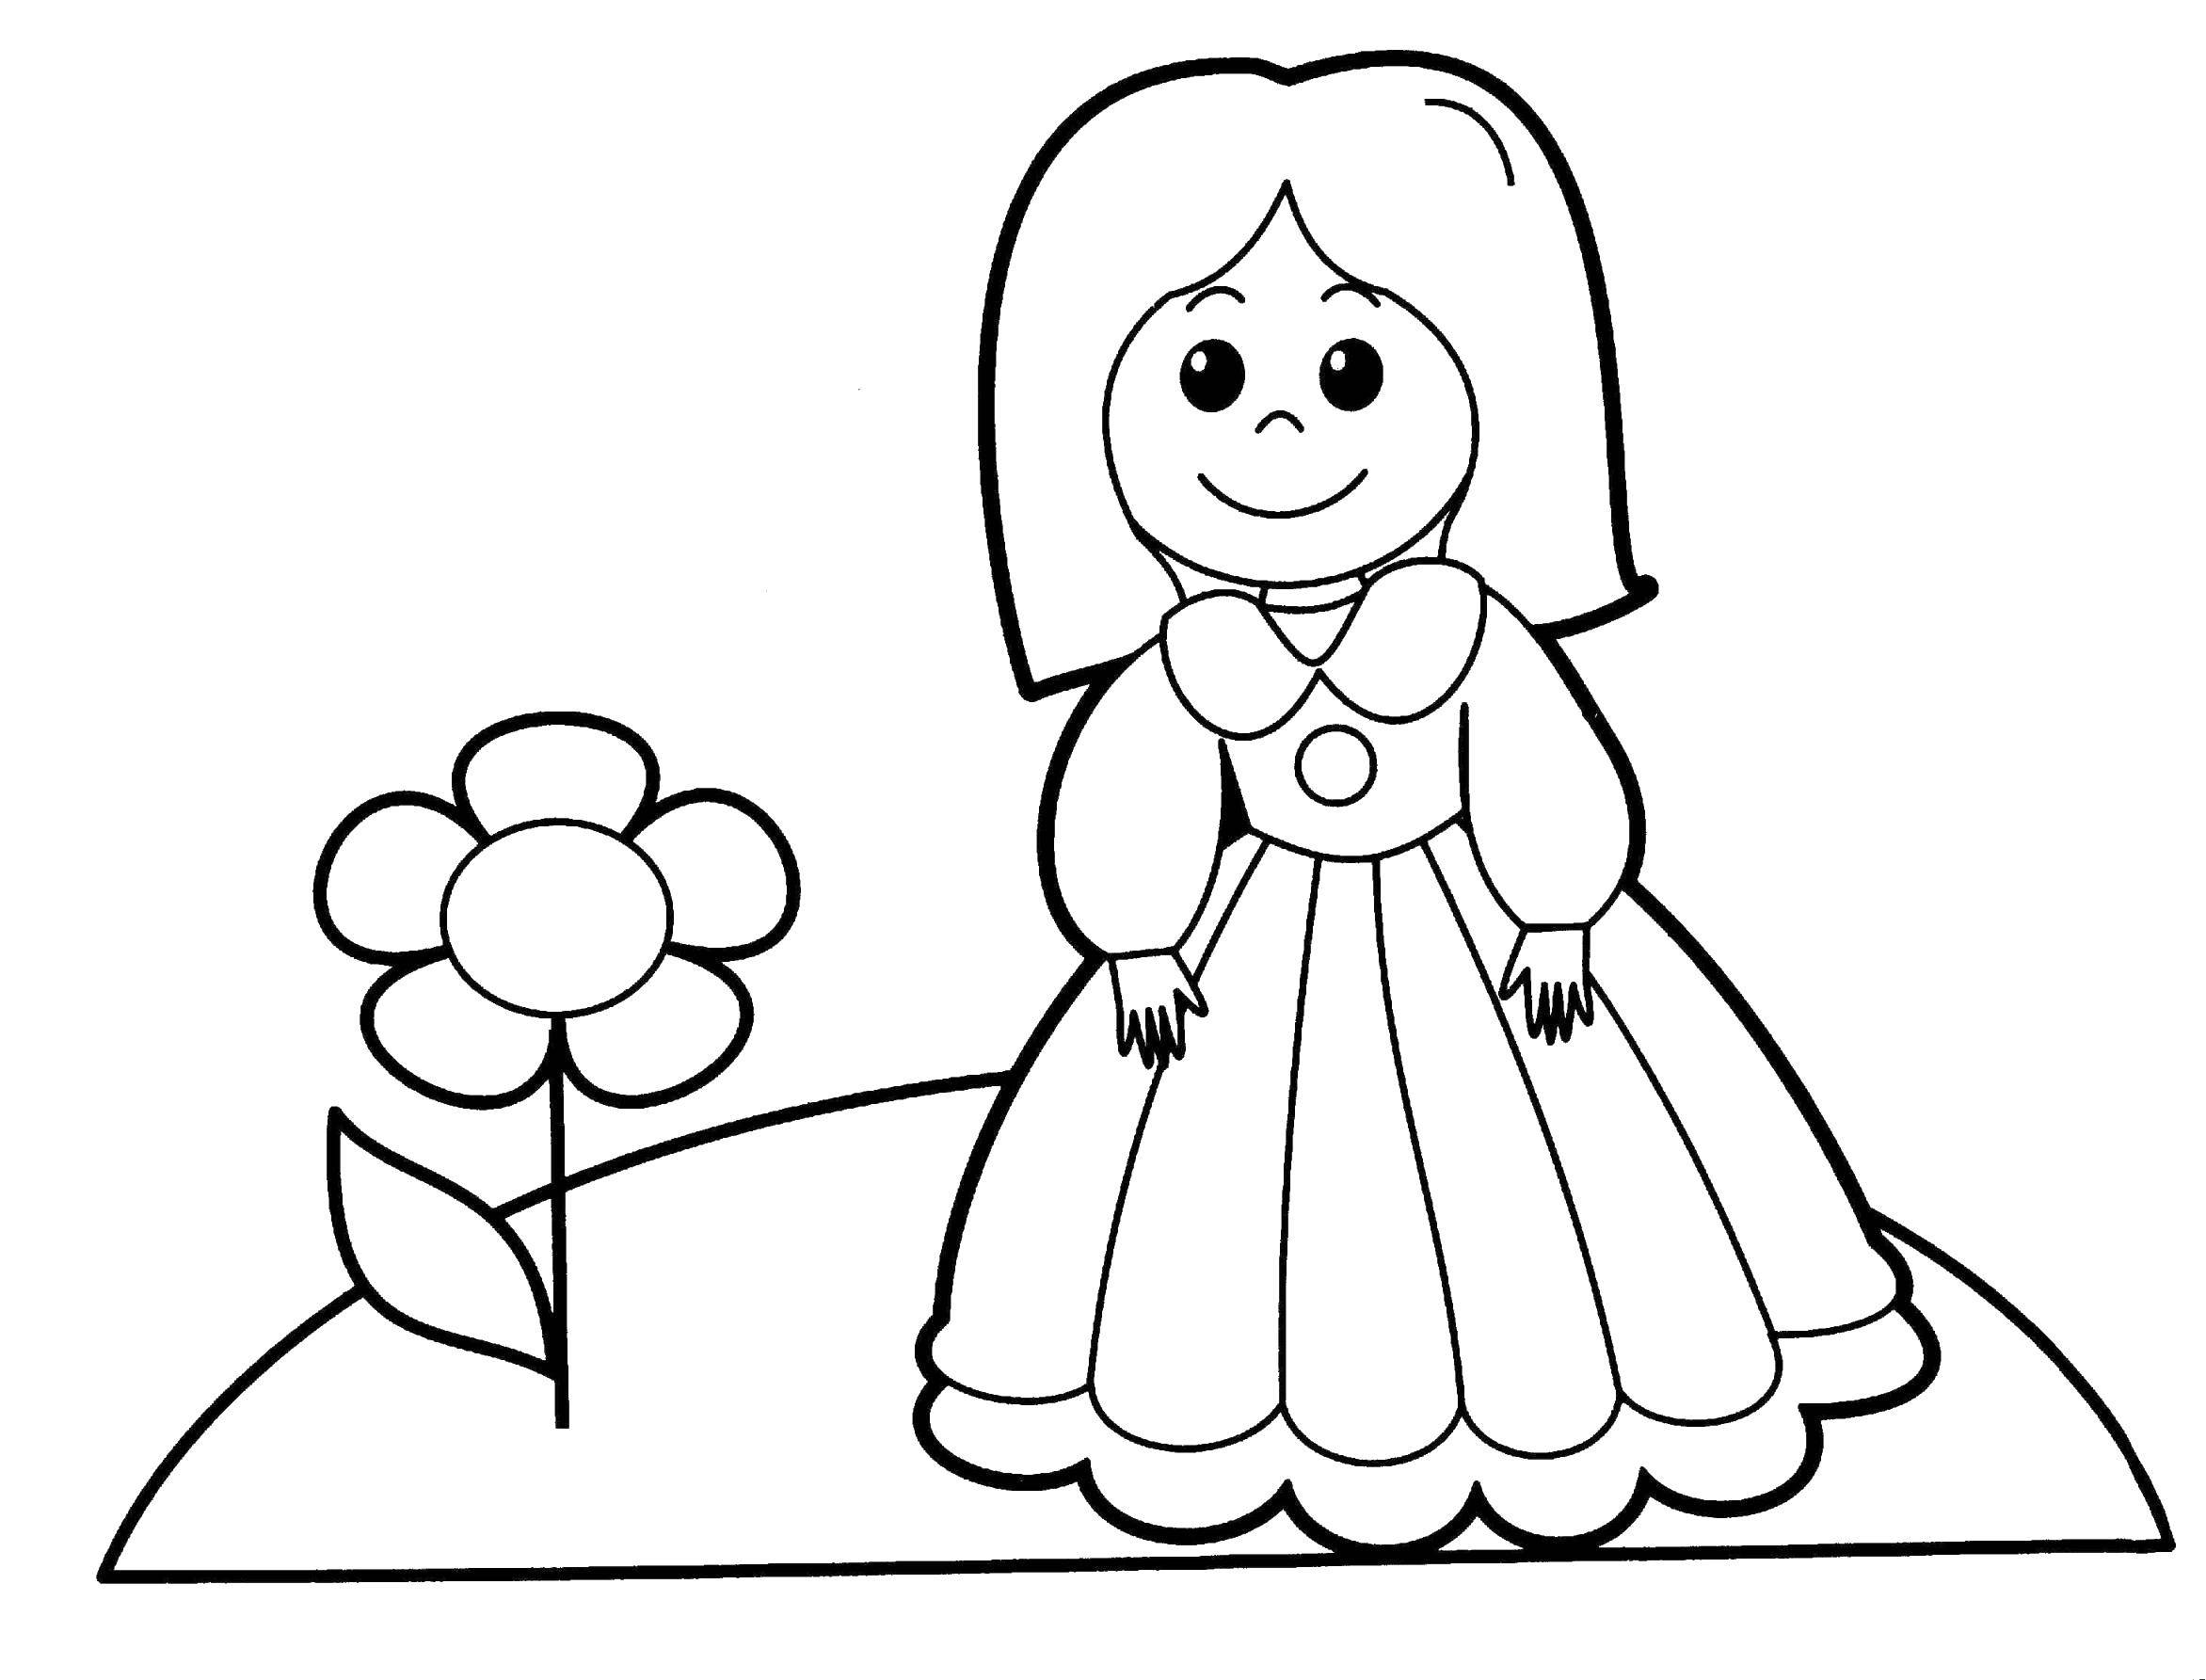 Coloring Girl goes to flower. Category coloring pages for girls. Tags:  girl , flowers.